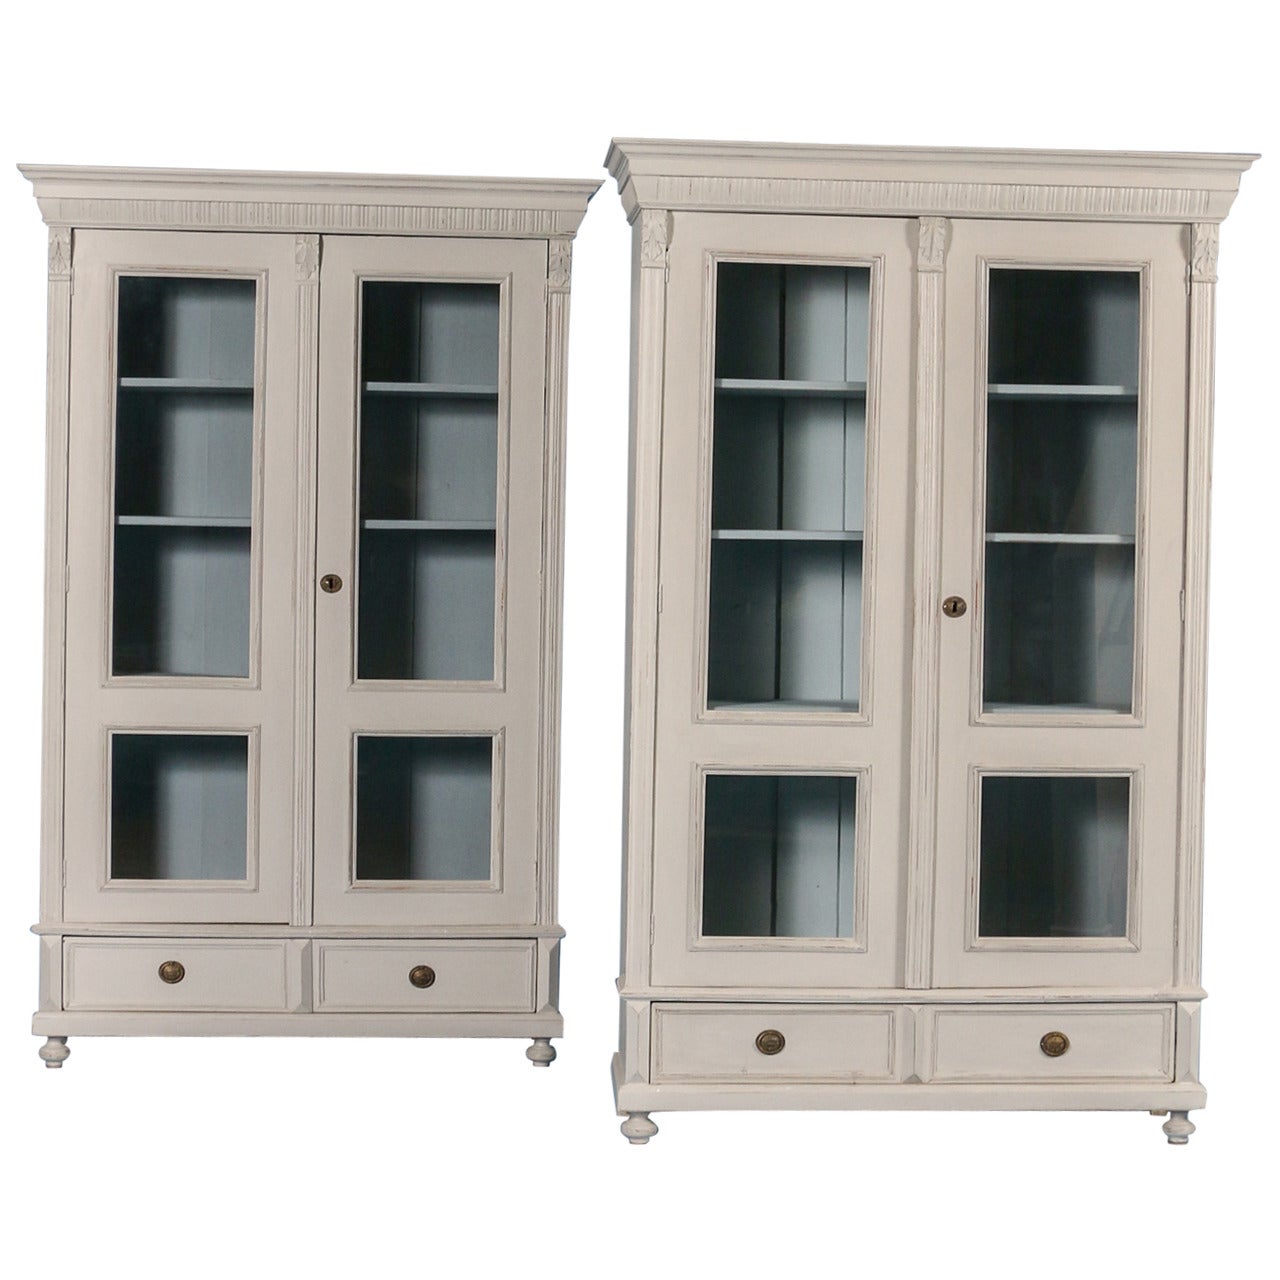 Pair of Antique Matching Set of Two Soft Gray Bookcases, Sweden, circa 1880